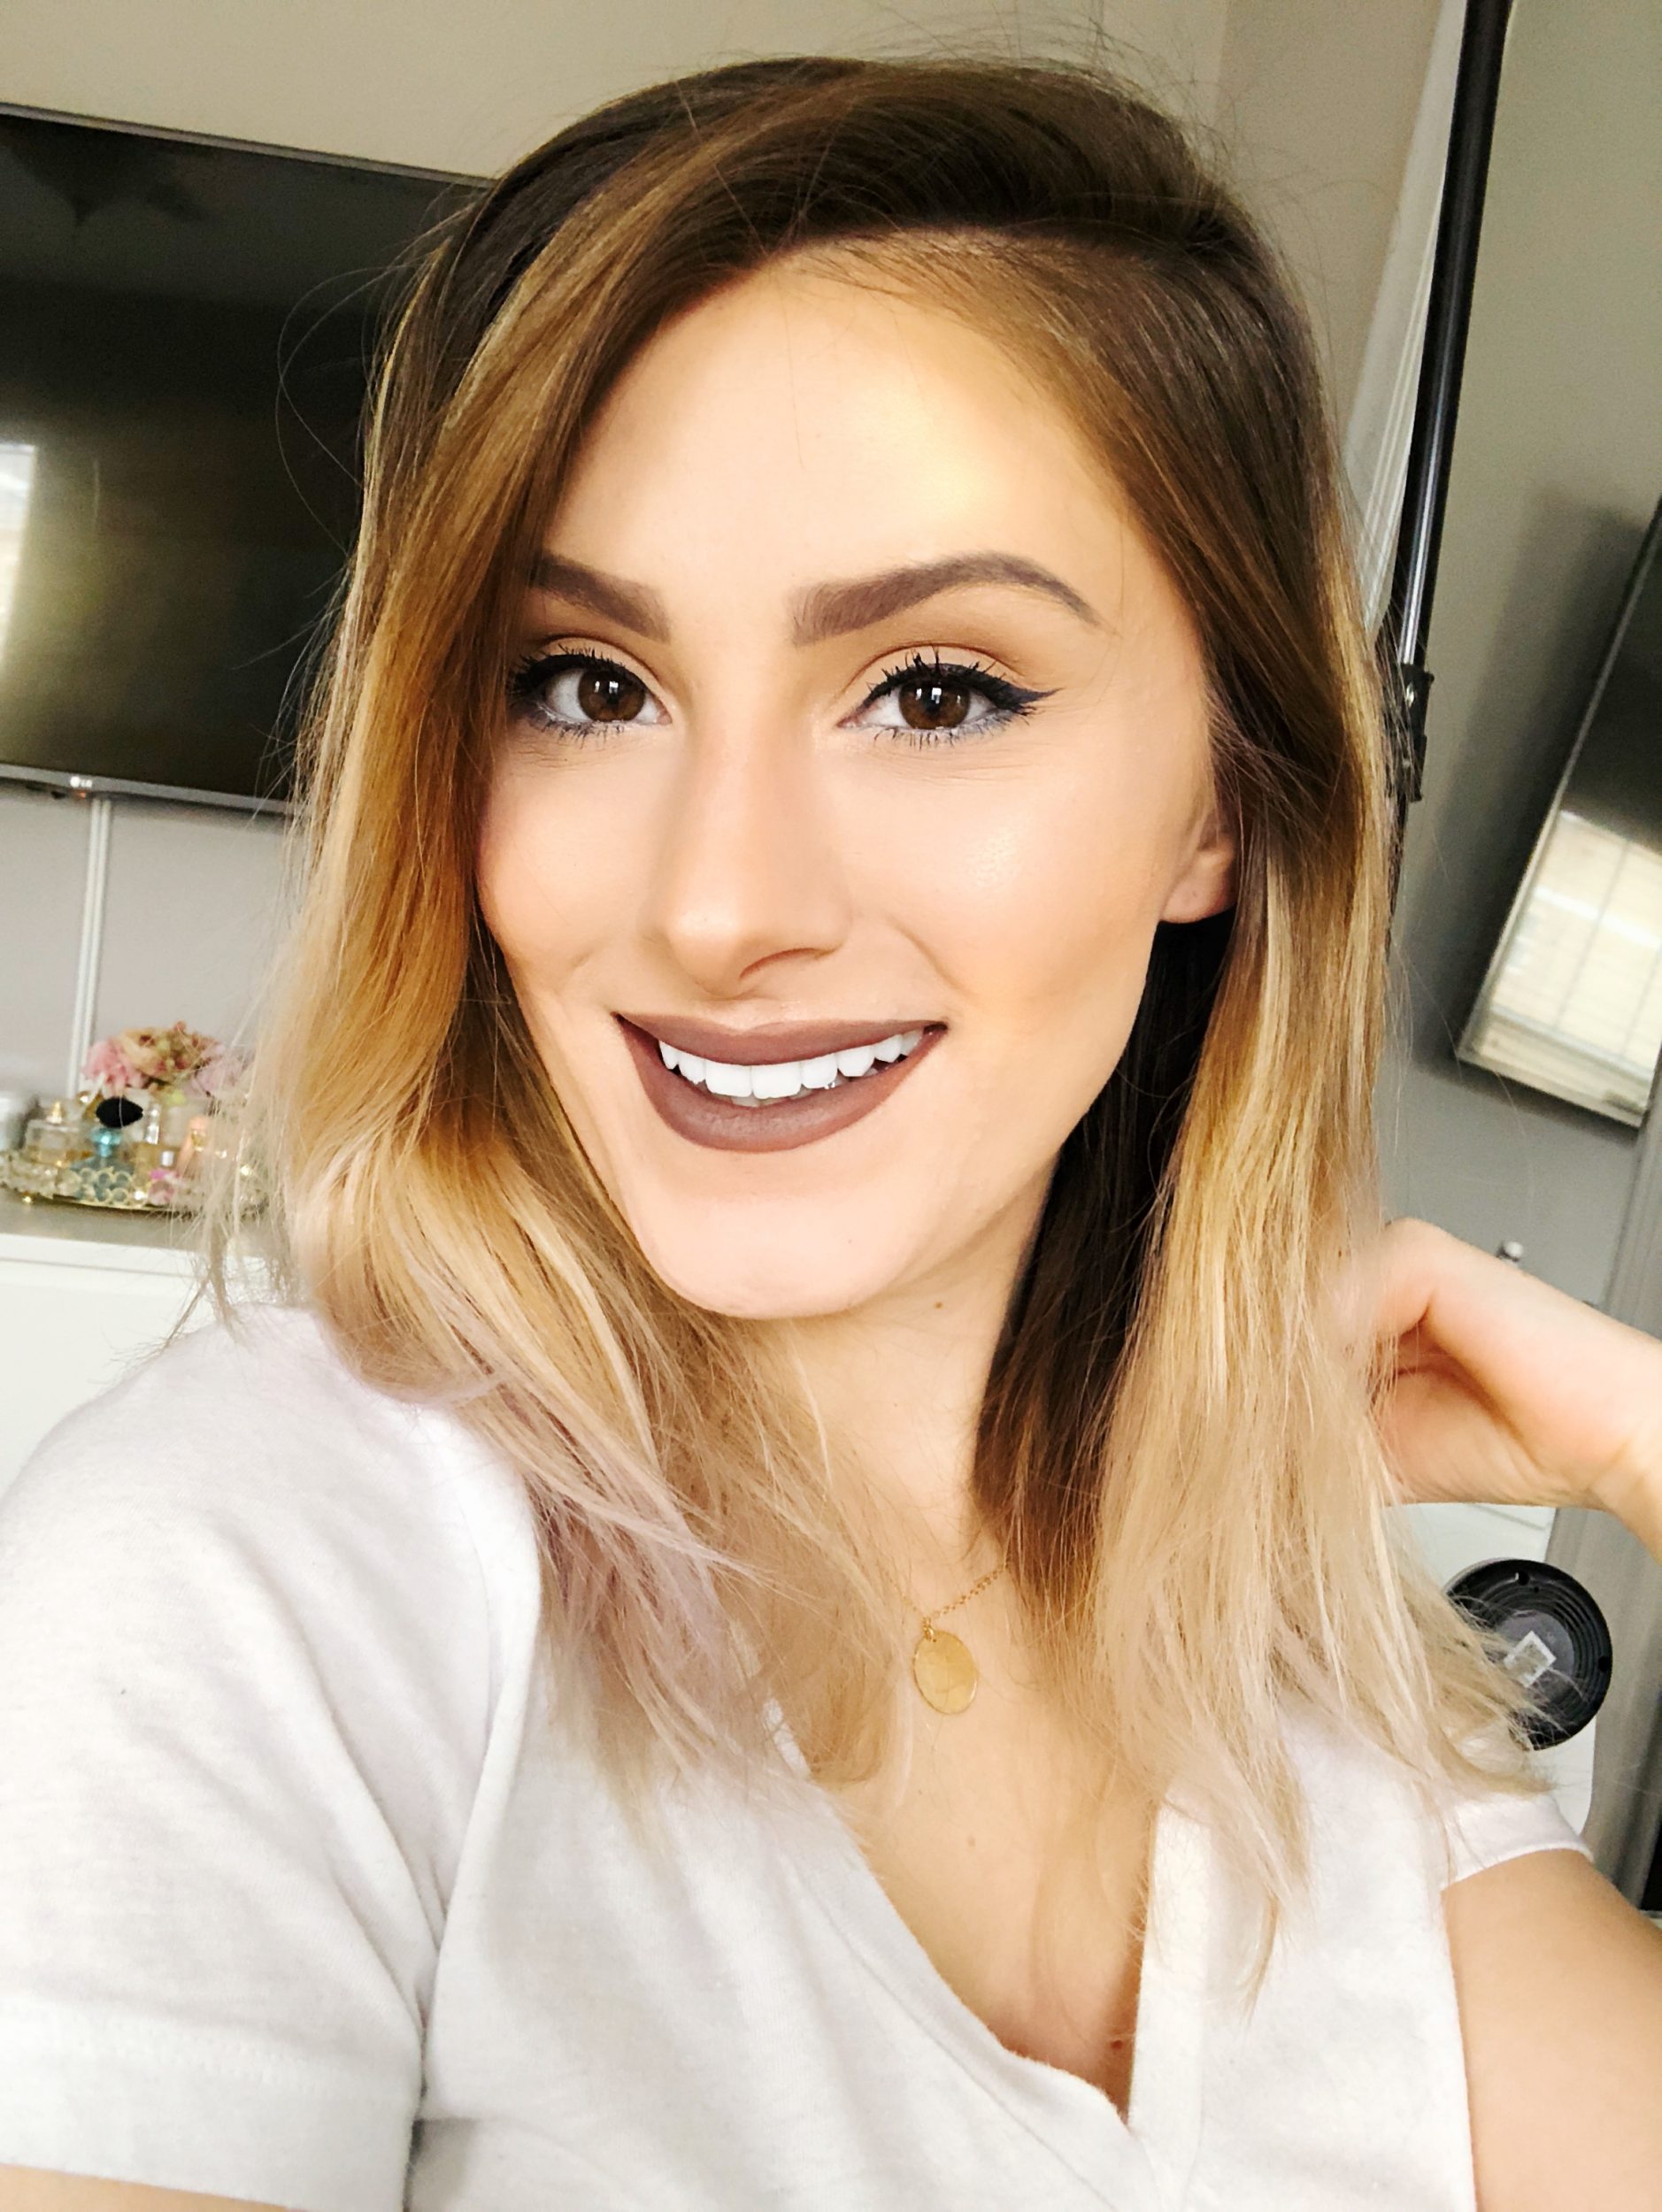 North Carolina fashion beauty and lifestyle blogger and vlogger Jessica Linn in a Youtube video review and demonstration of Carbon Coco The Ultimate Carbon Kit all natural organic activate charcoal teeth whitening